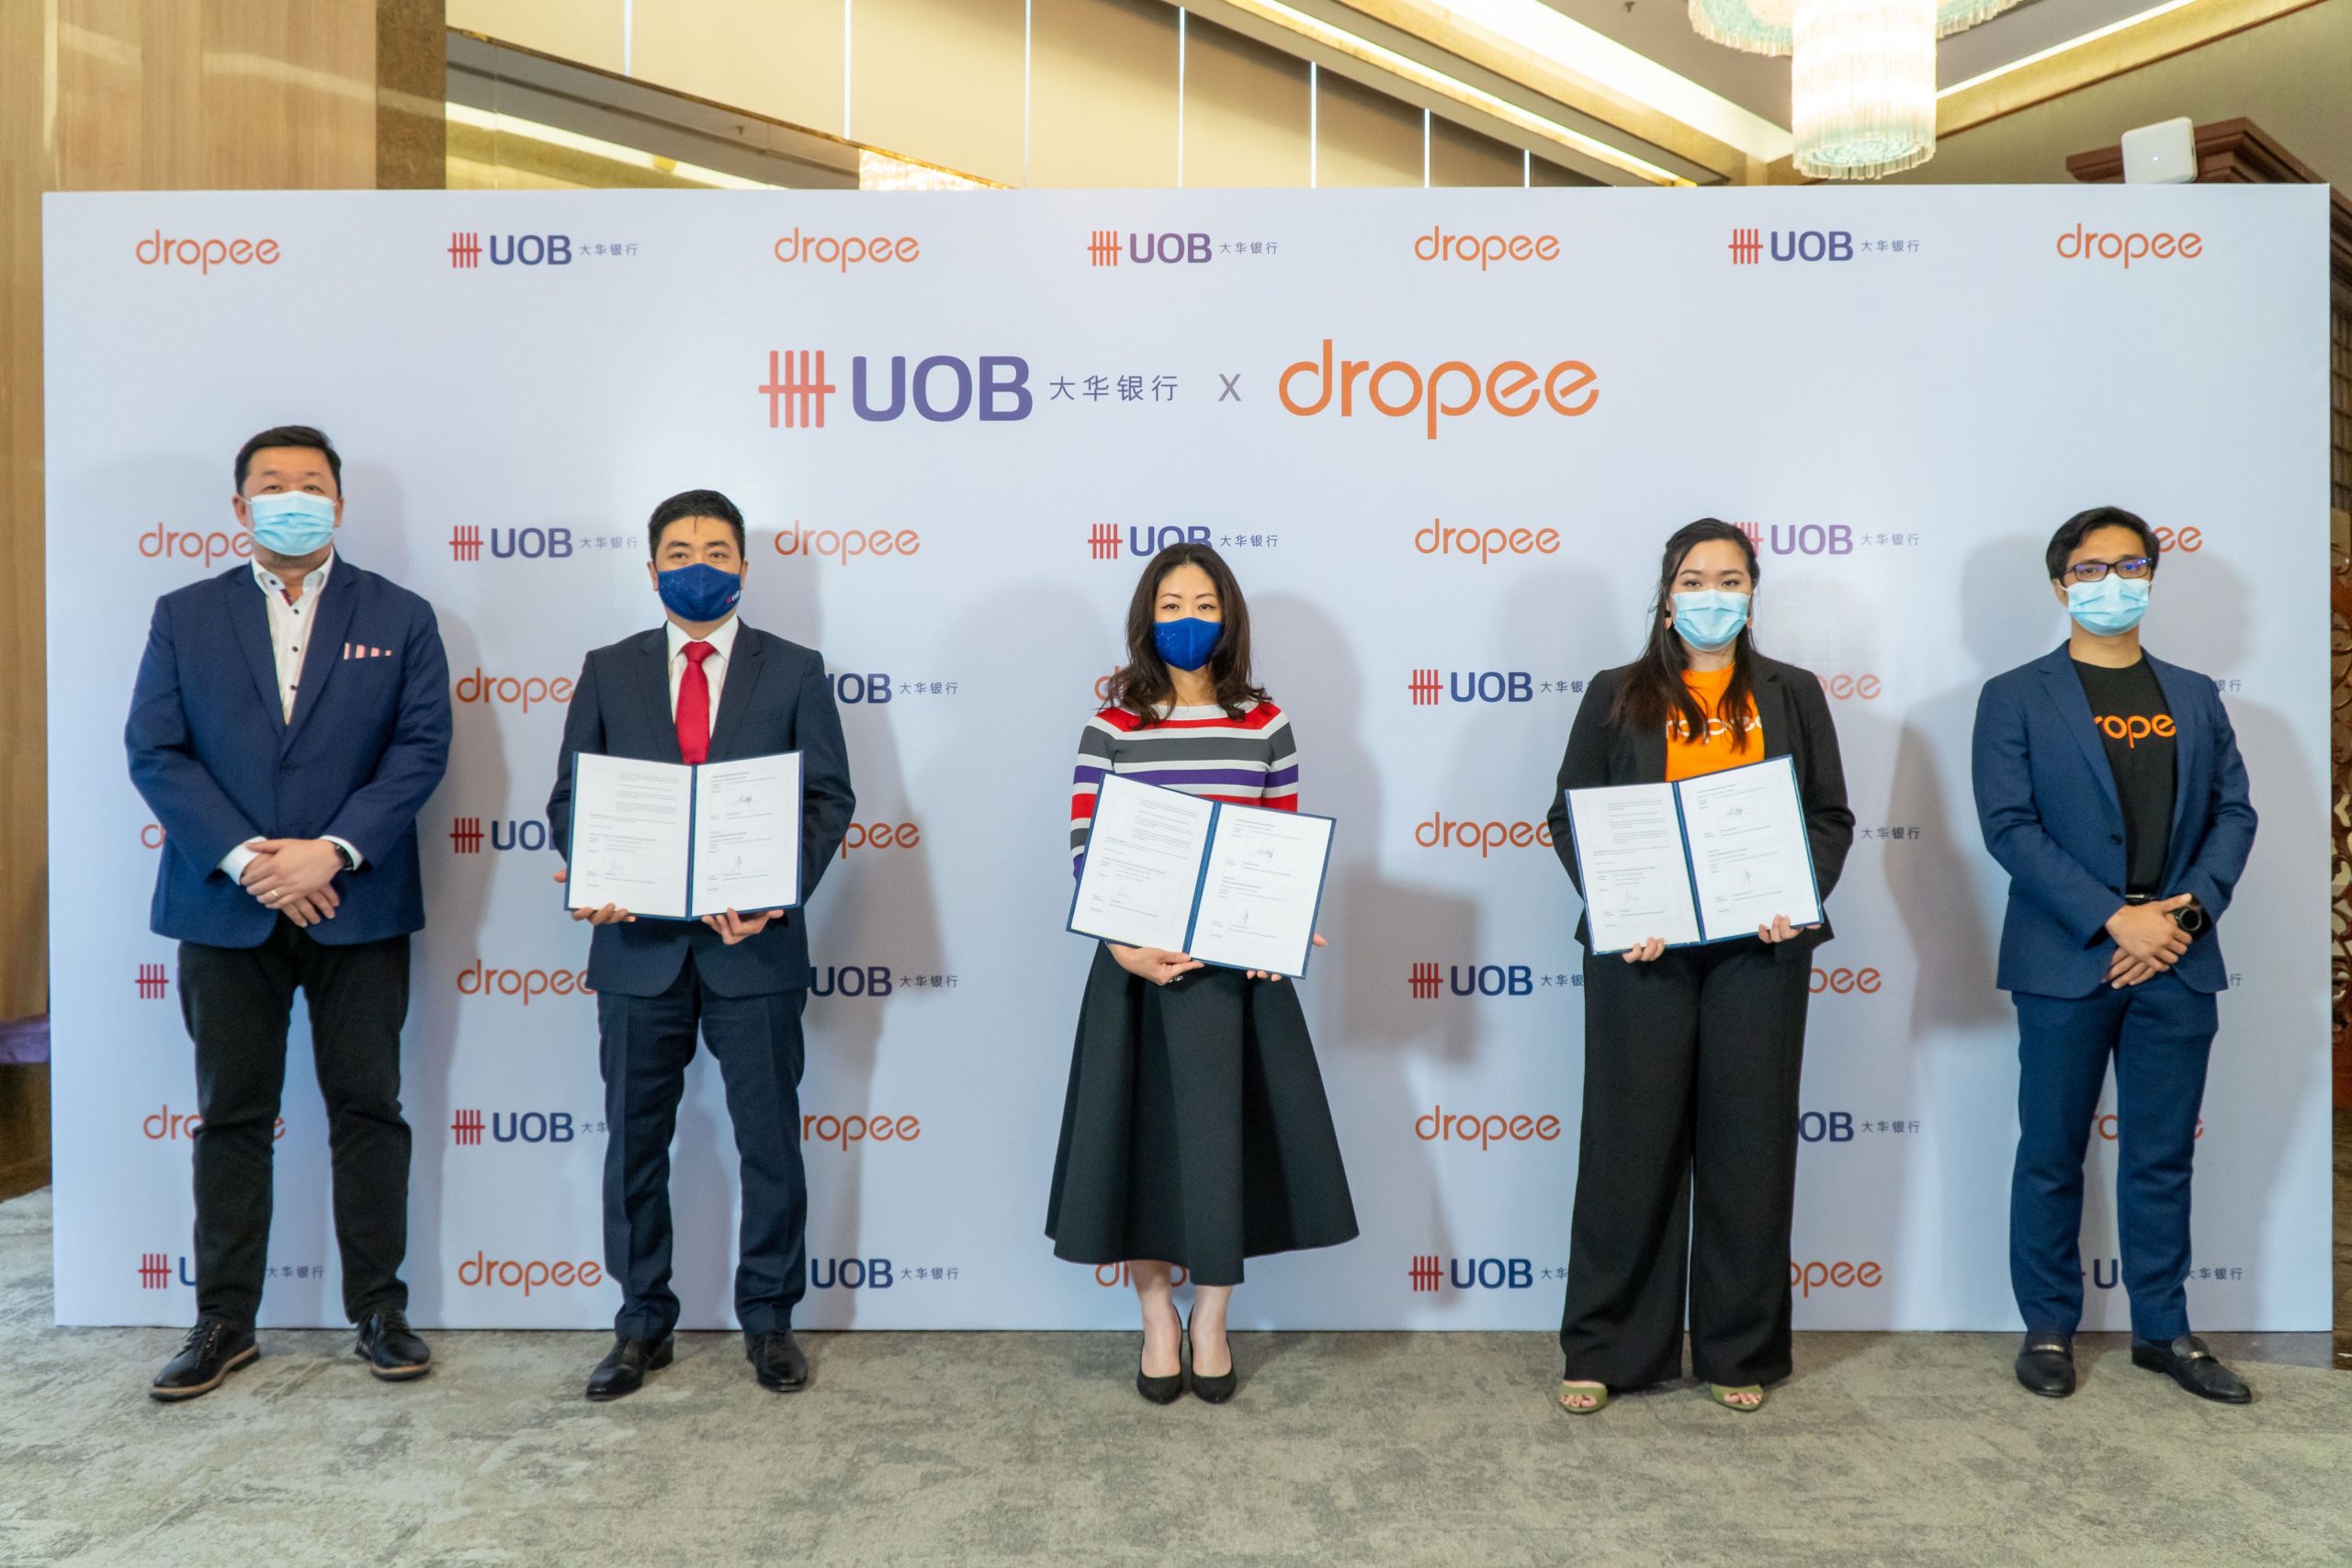 uob dropee official event